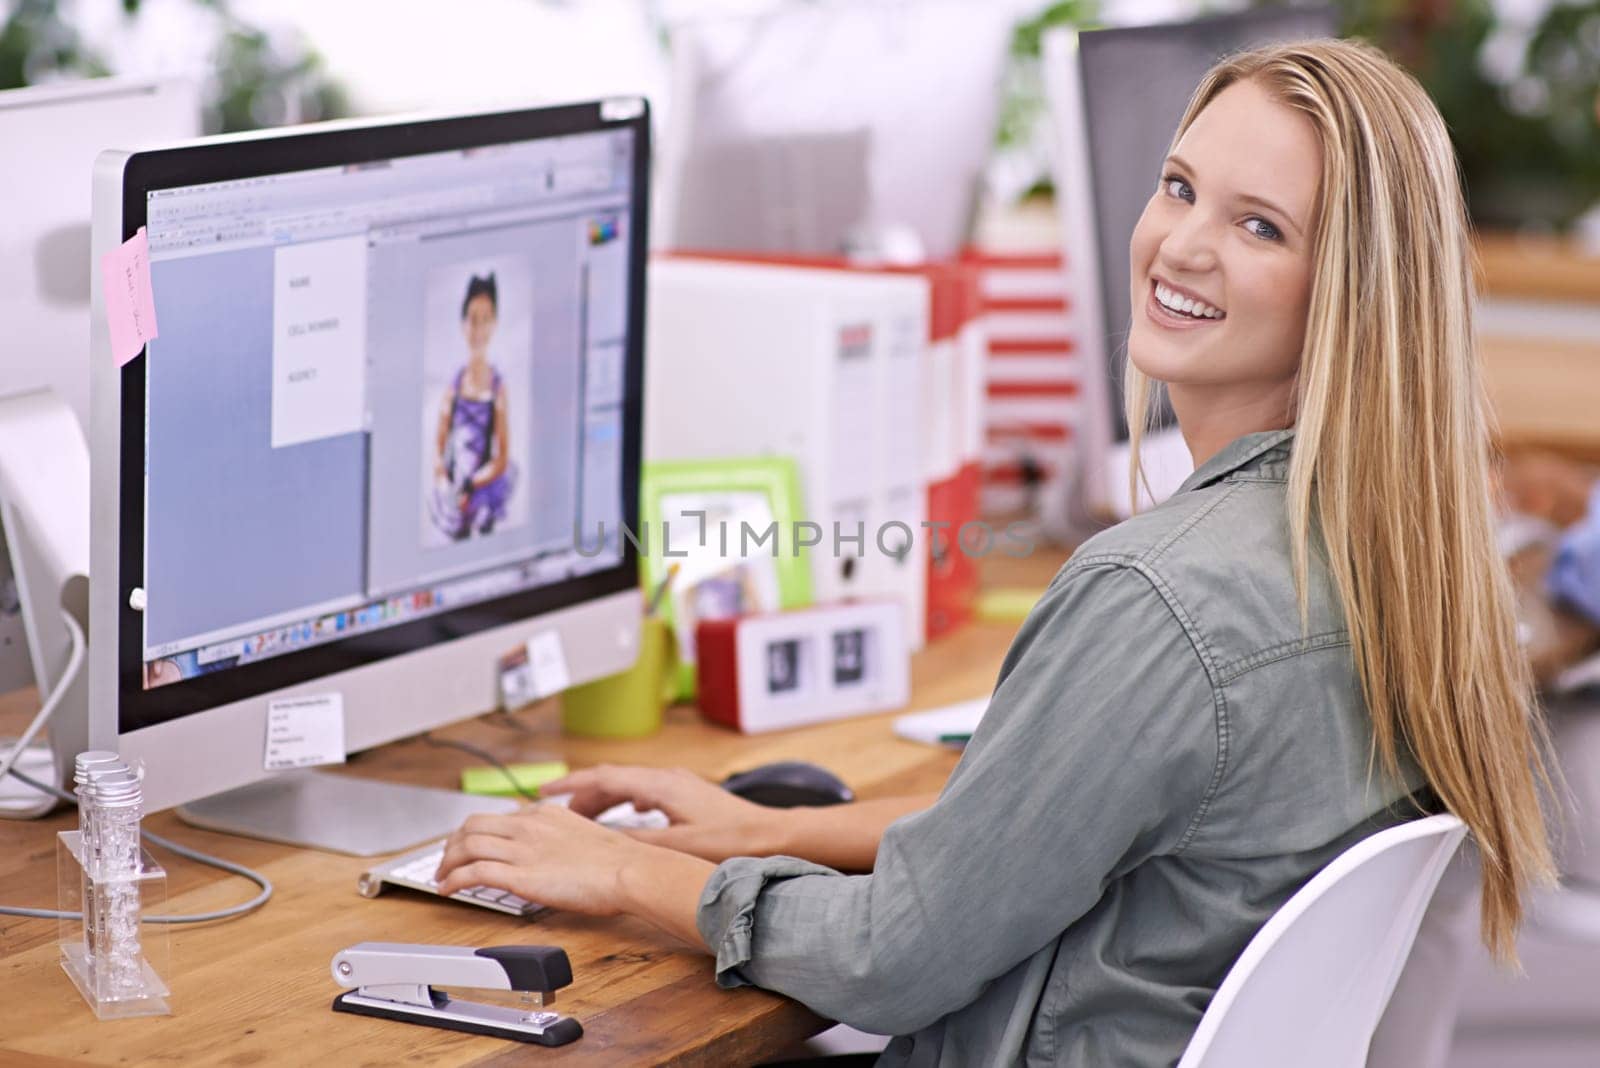 Woman at desk, computer screen and smile in portrait, editor at fashion magazine. Young professional female, image editing software for publication with creativity and editorial career with design by YuriArcurs